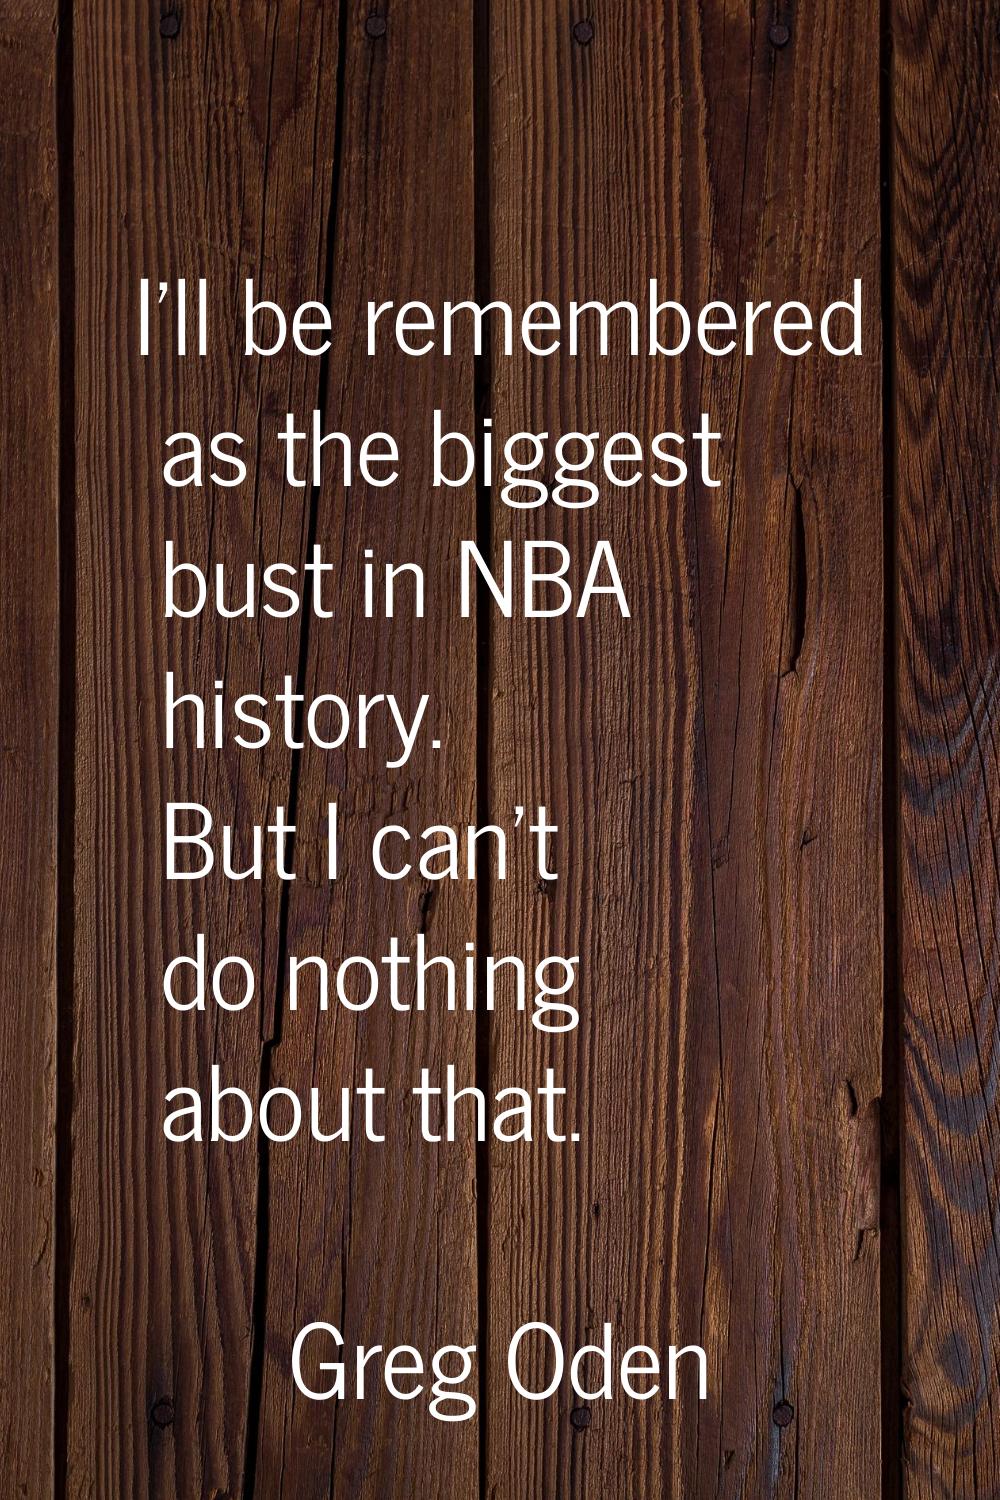 I'll be remembered as the biggest bust in NBA history. But I can't do nothing about that.